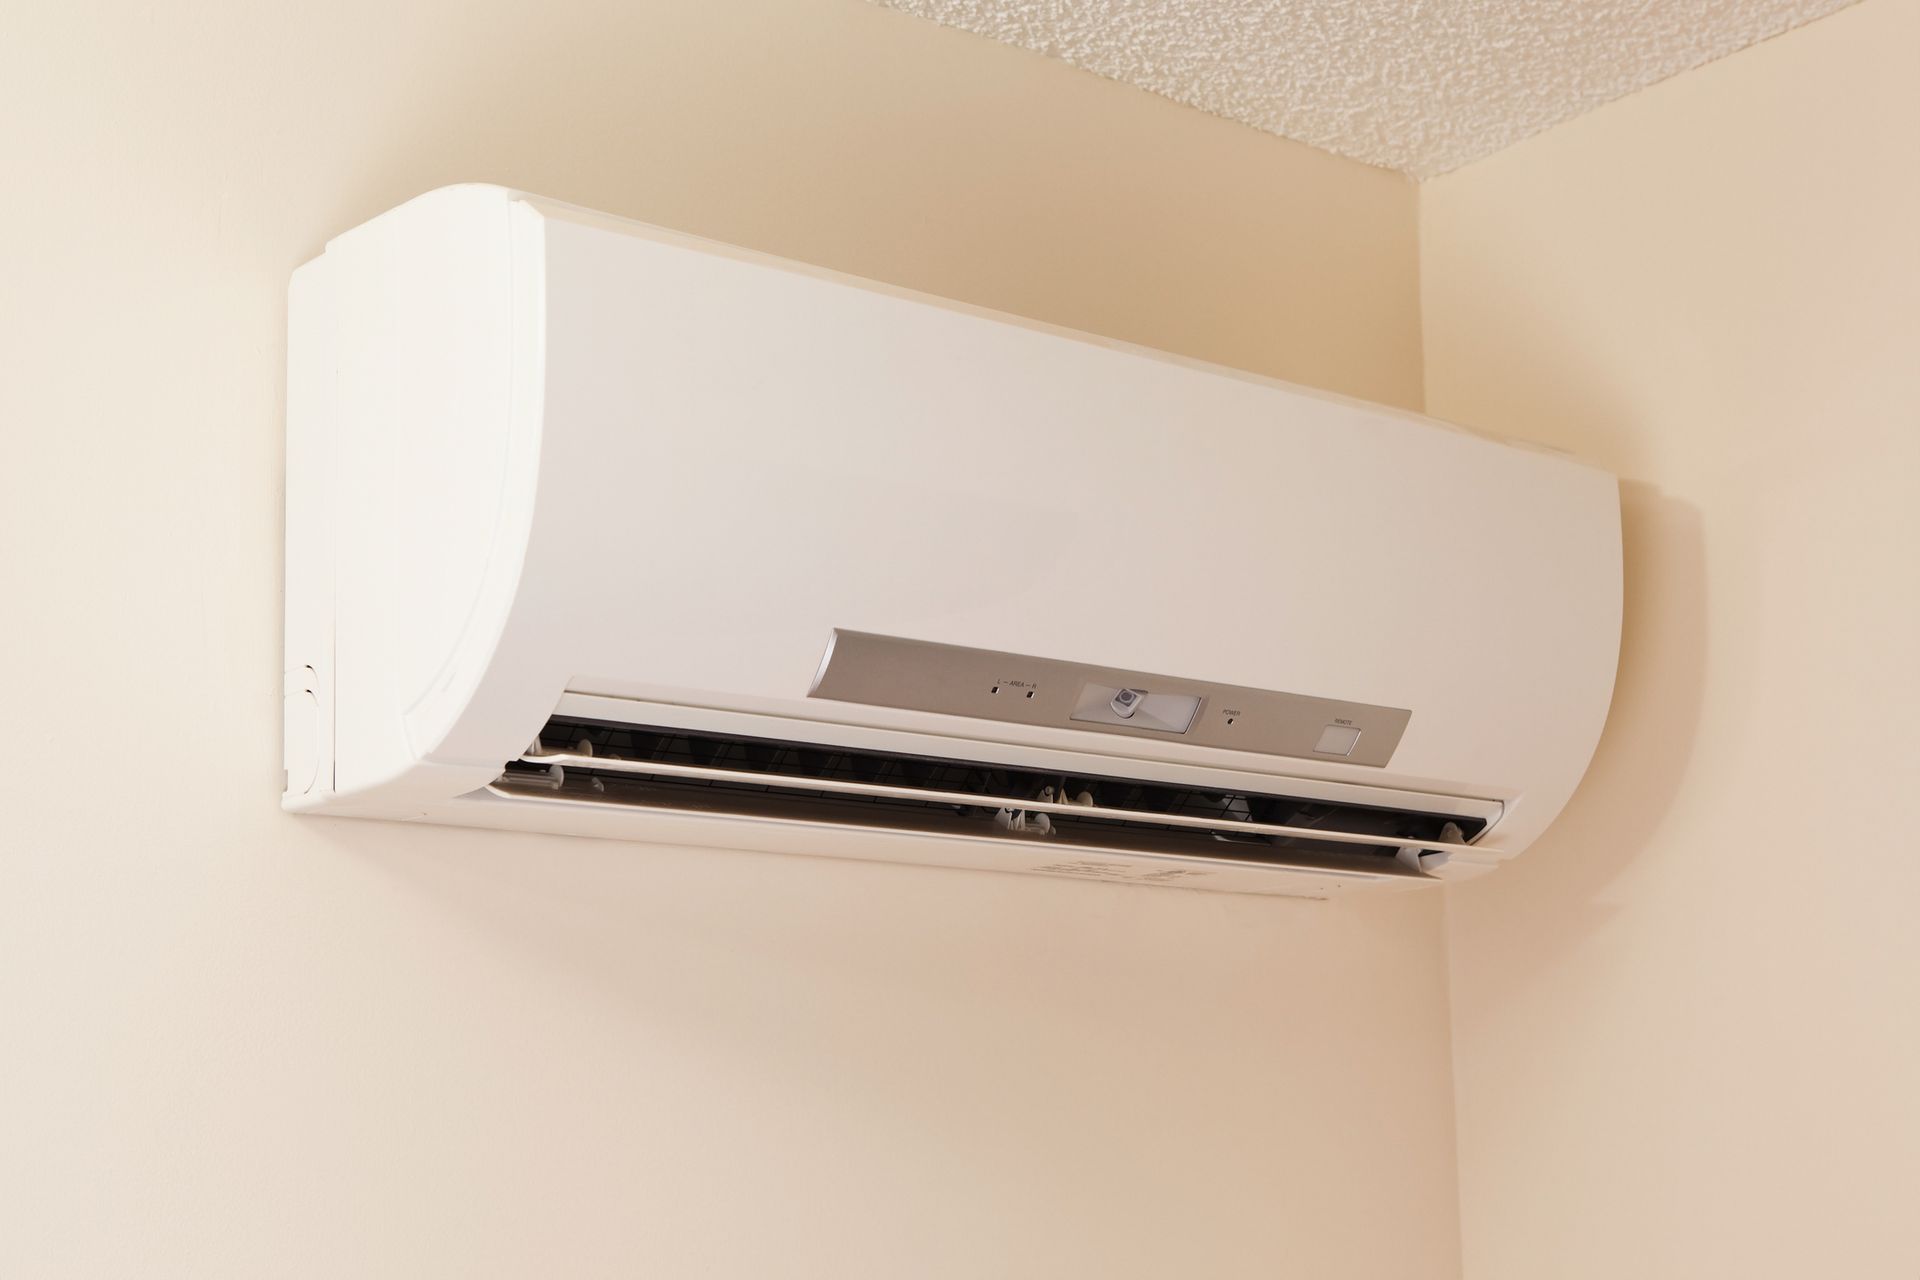 Mini-Split Heat Pump Heating and Air Conditioning Unit installed by Gibson Heating and Cooling.